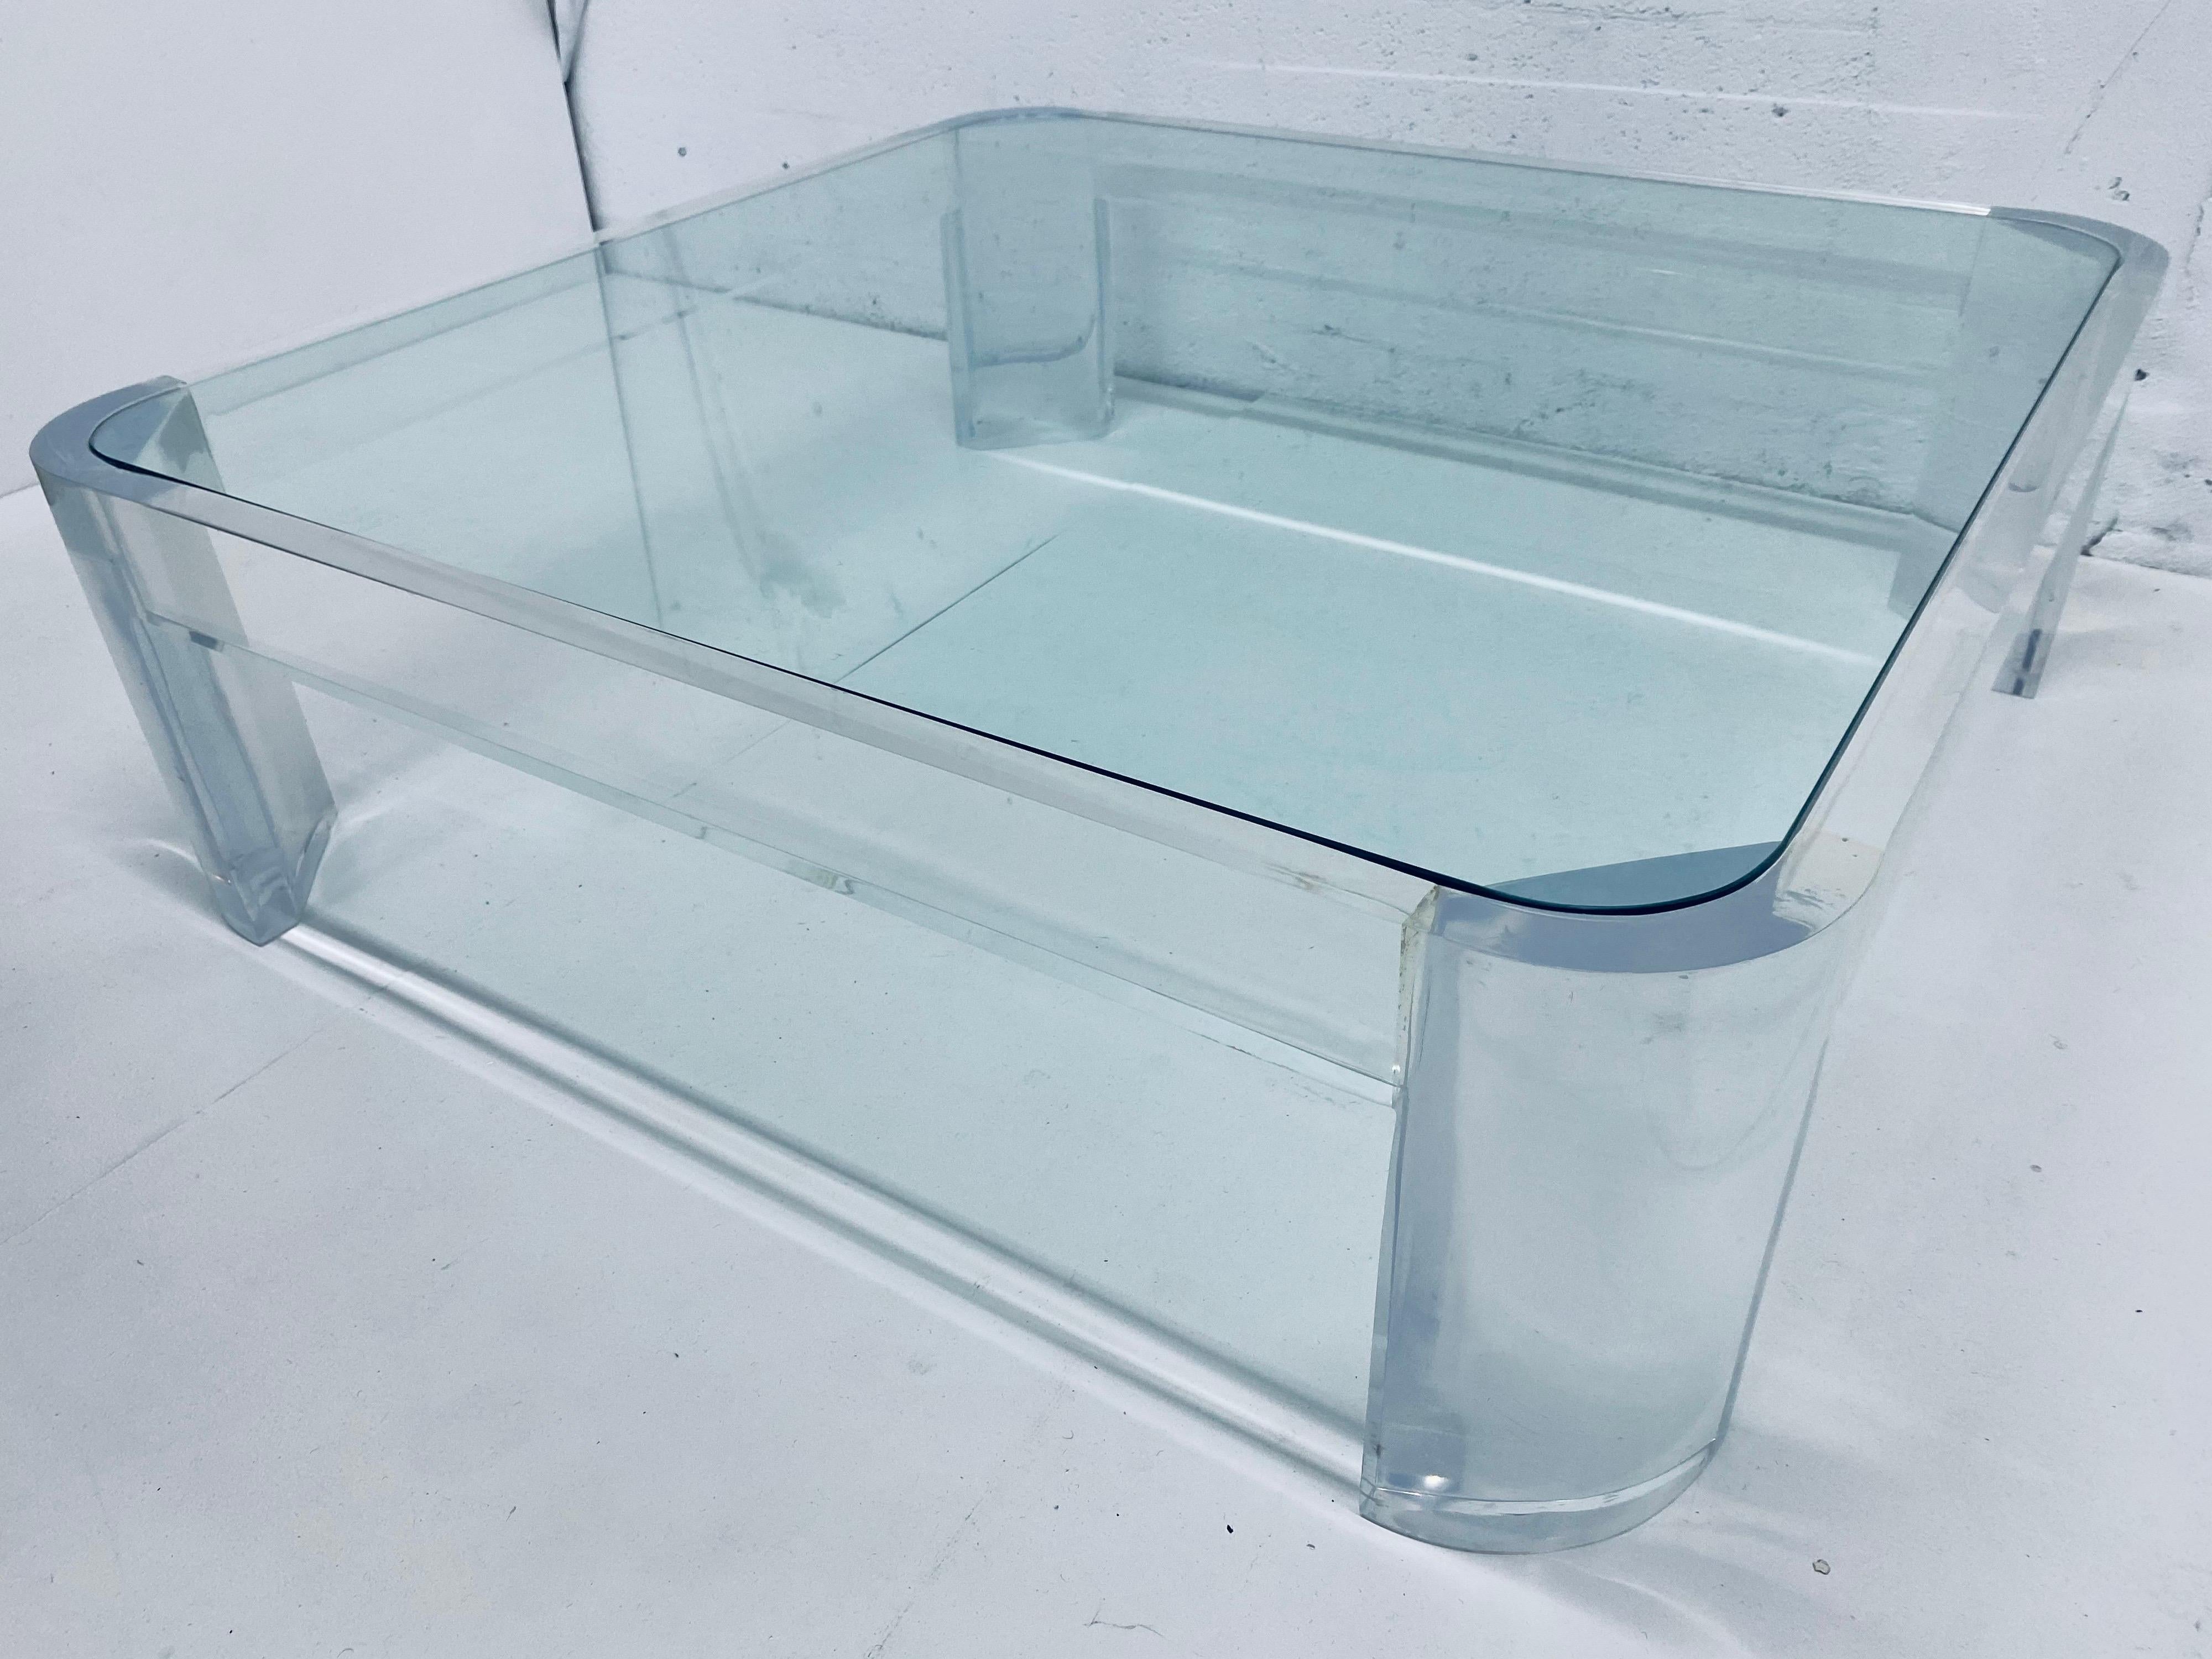 Thick Lucite frame with inset clear glass top coffee table from the 1970s by Les Prismatiques. Lucite frame is 1-1/2